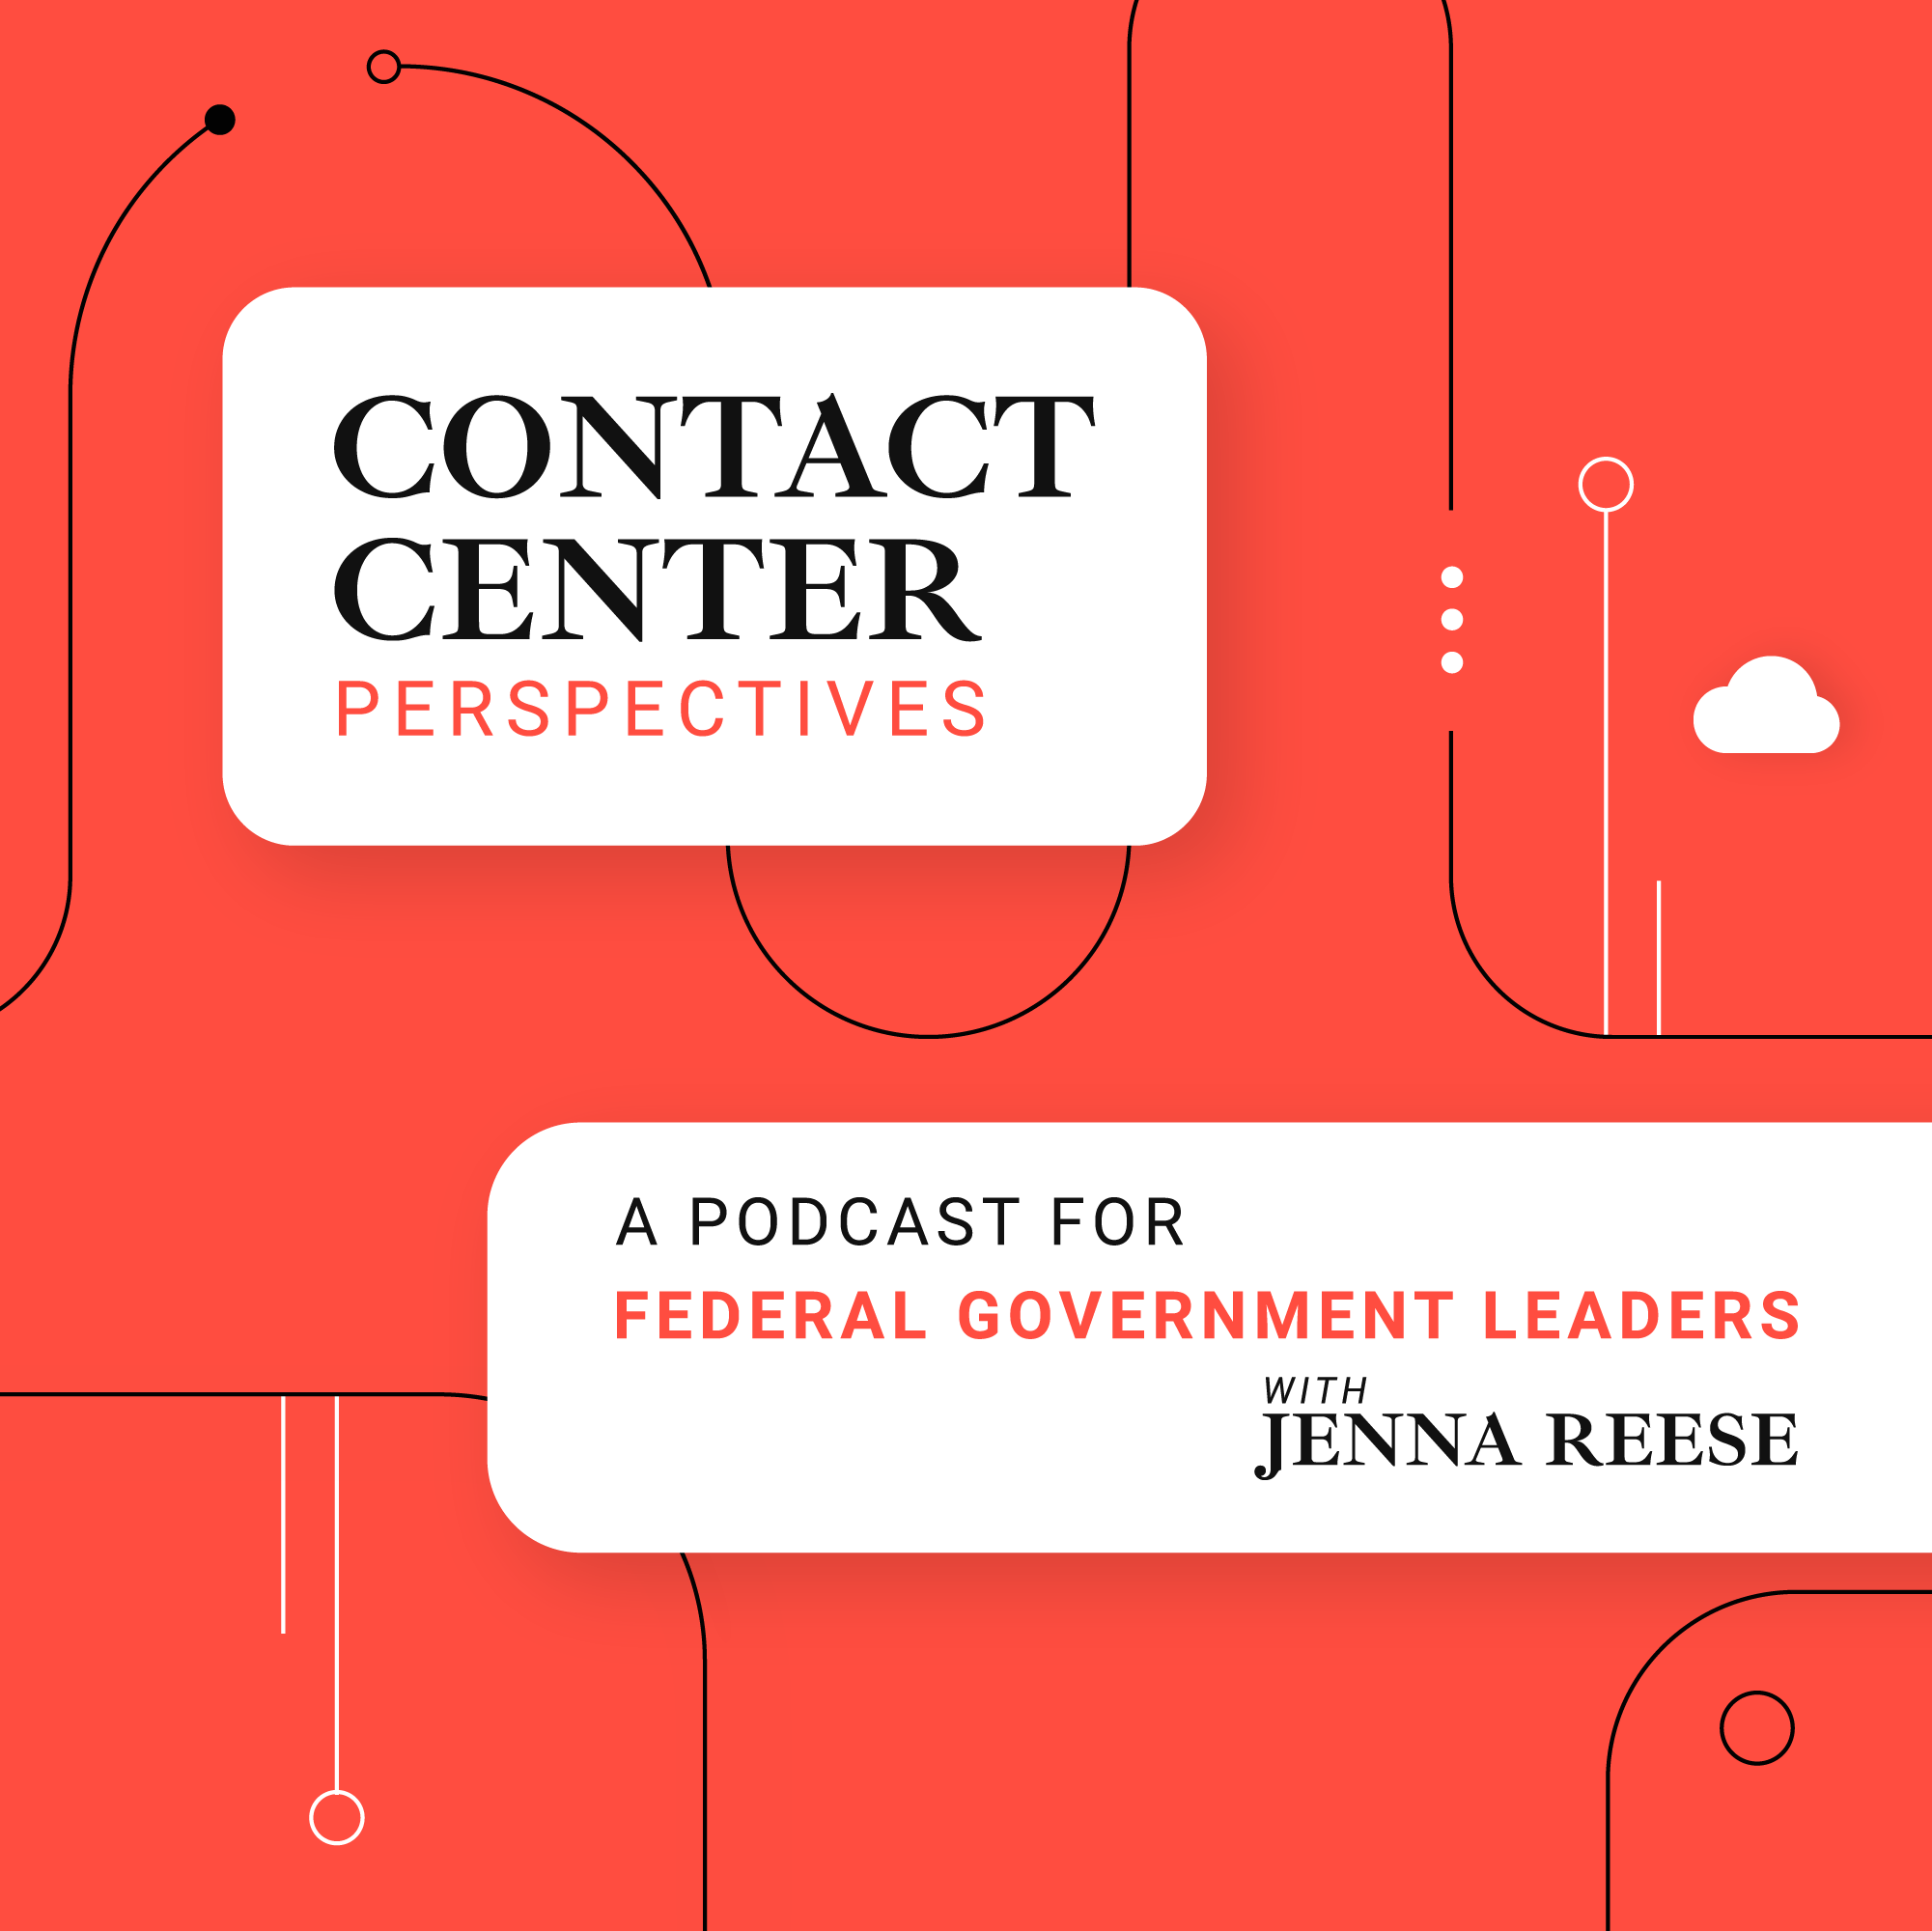 Contact Center Podcast